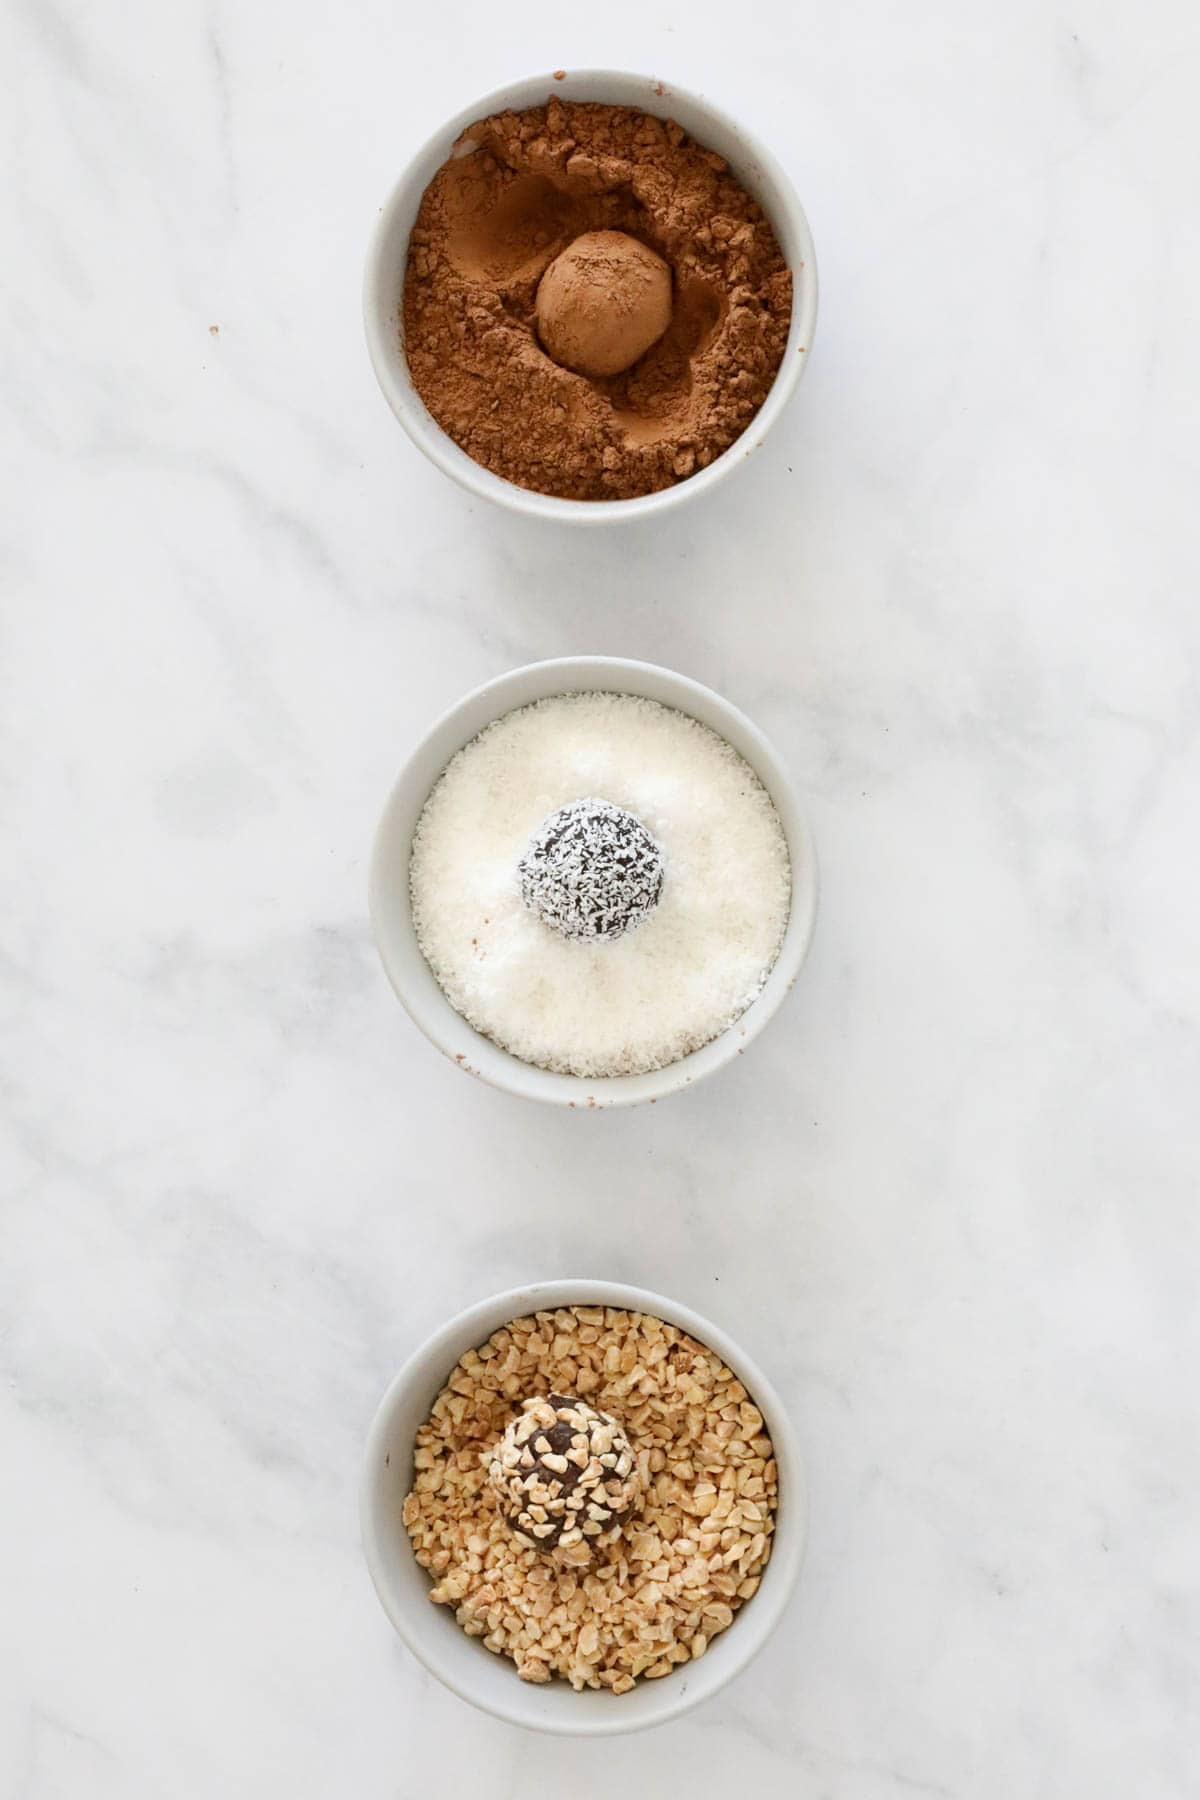 Three bowls of truffle coatings: cocoa powder, coconut and chopped peanuts, with a ganache truffle in each one.